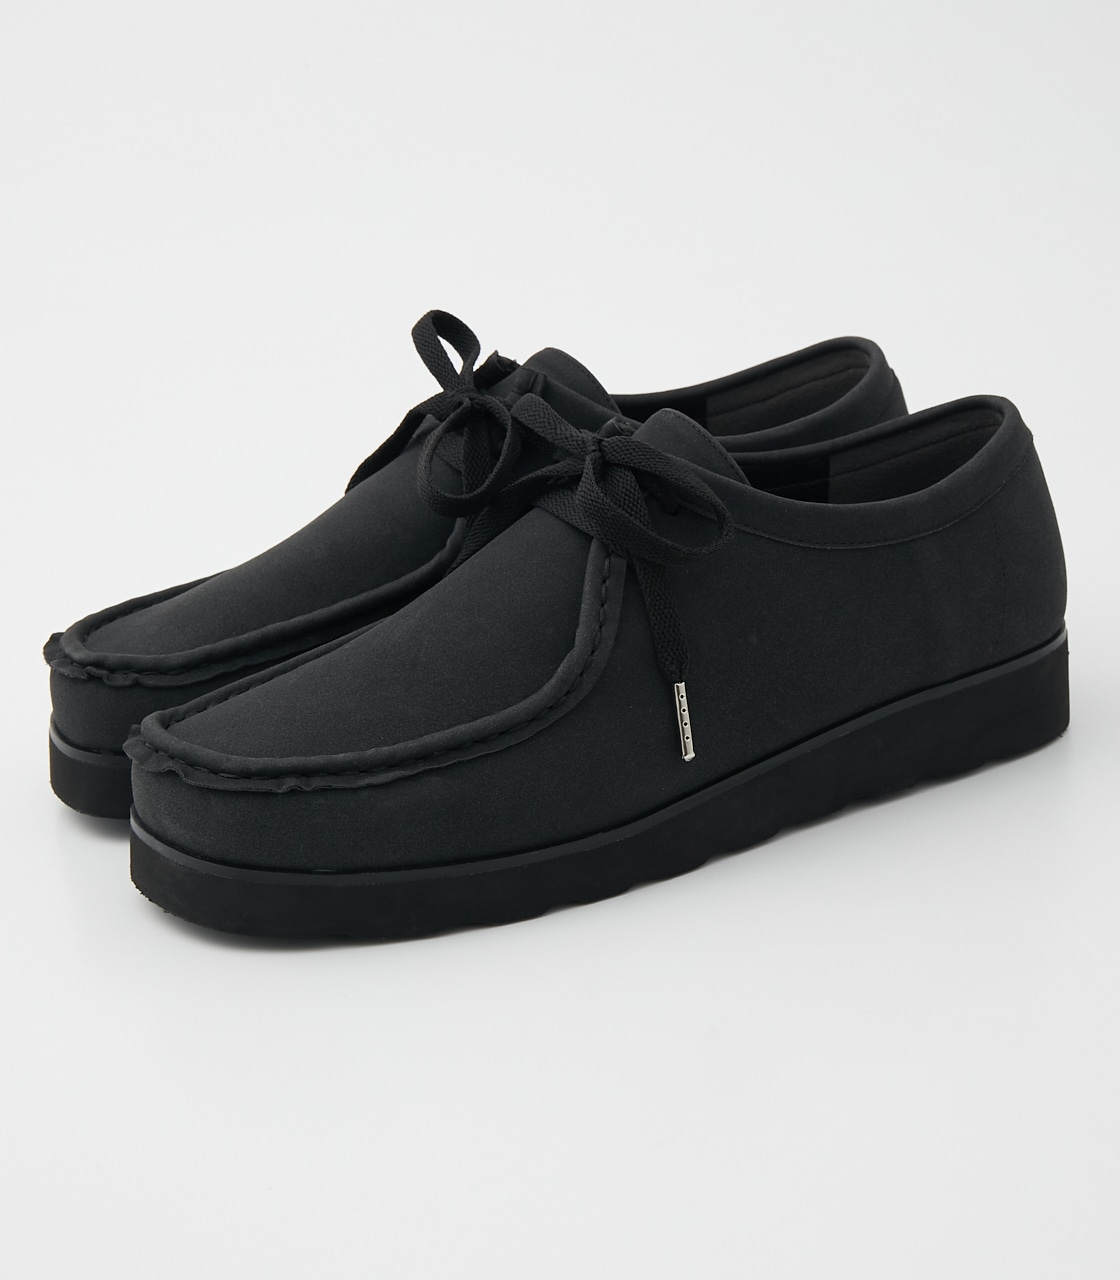 FAUX SUEDE MOCCASIN/フェイクスエードモカシン 詳細画像 BLK 1